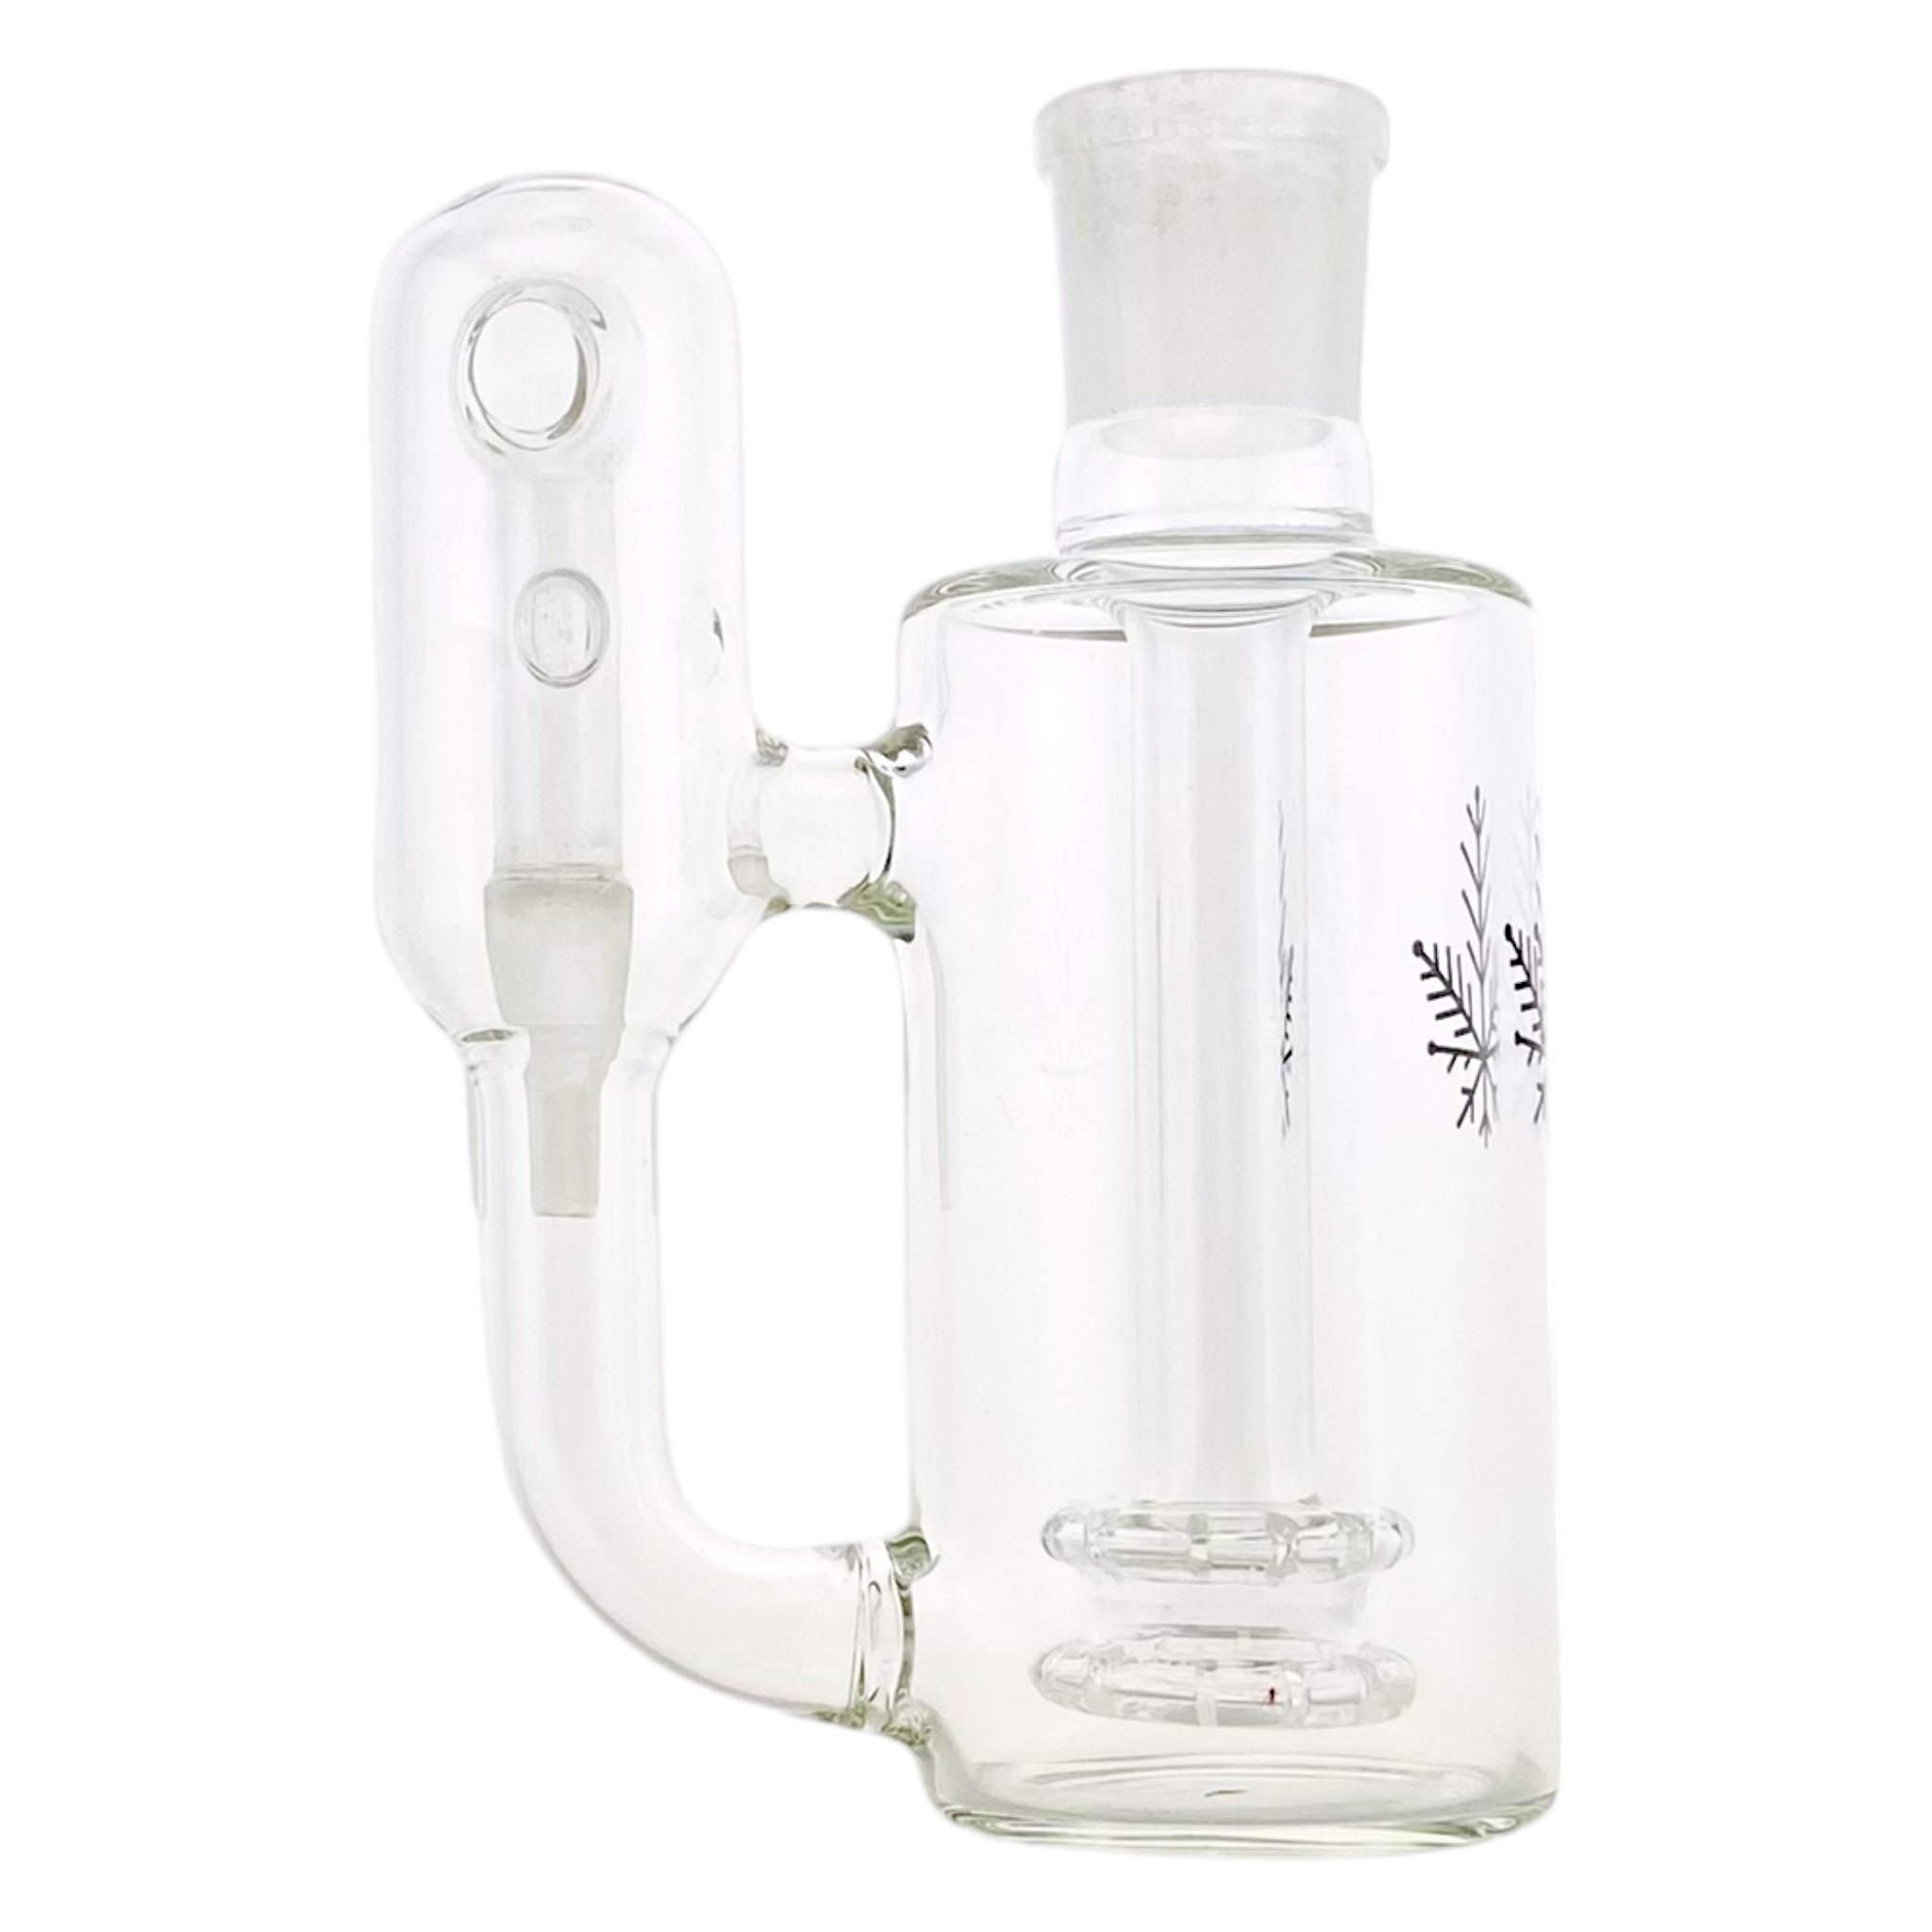 Freeze Pipe - 14mm Recycler Ash Catcher With Shower Head Perc